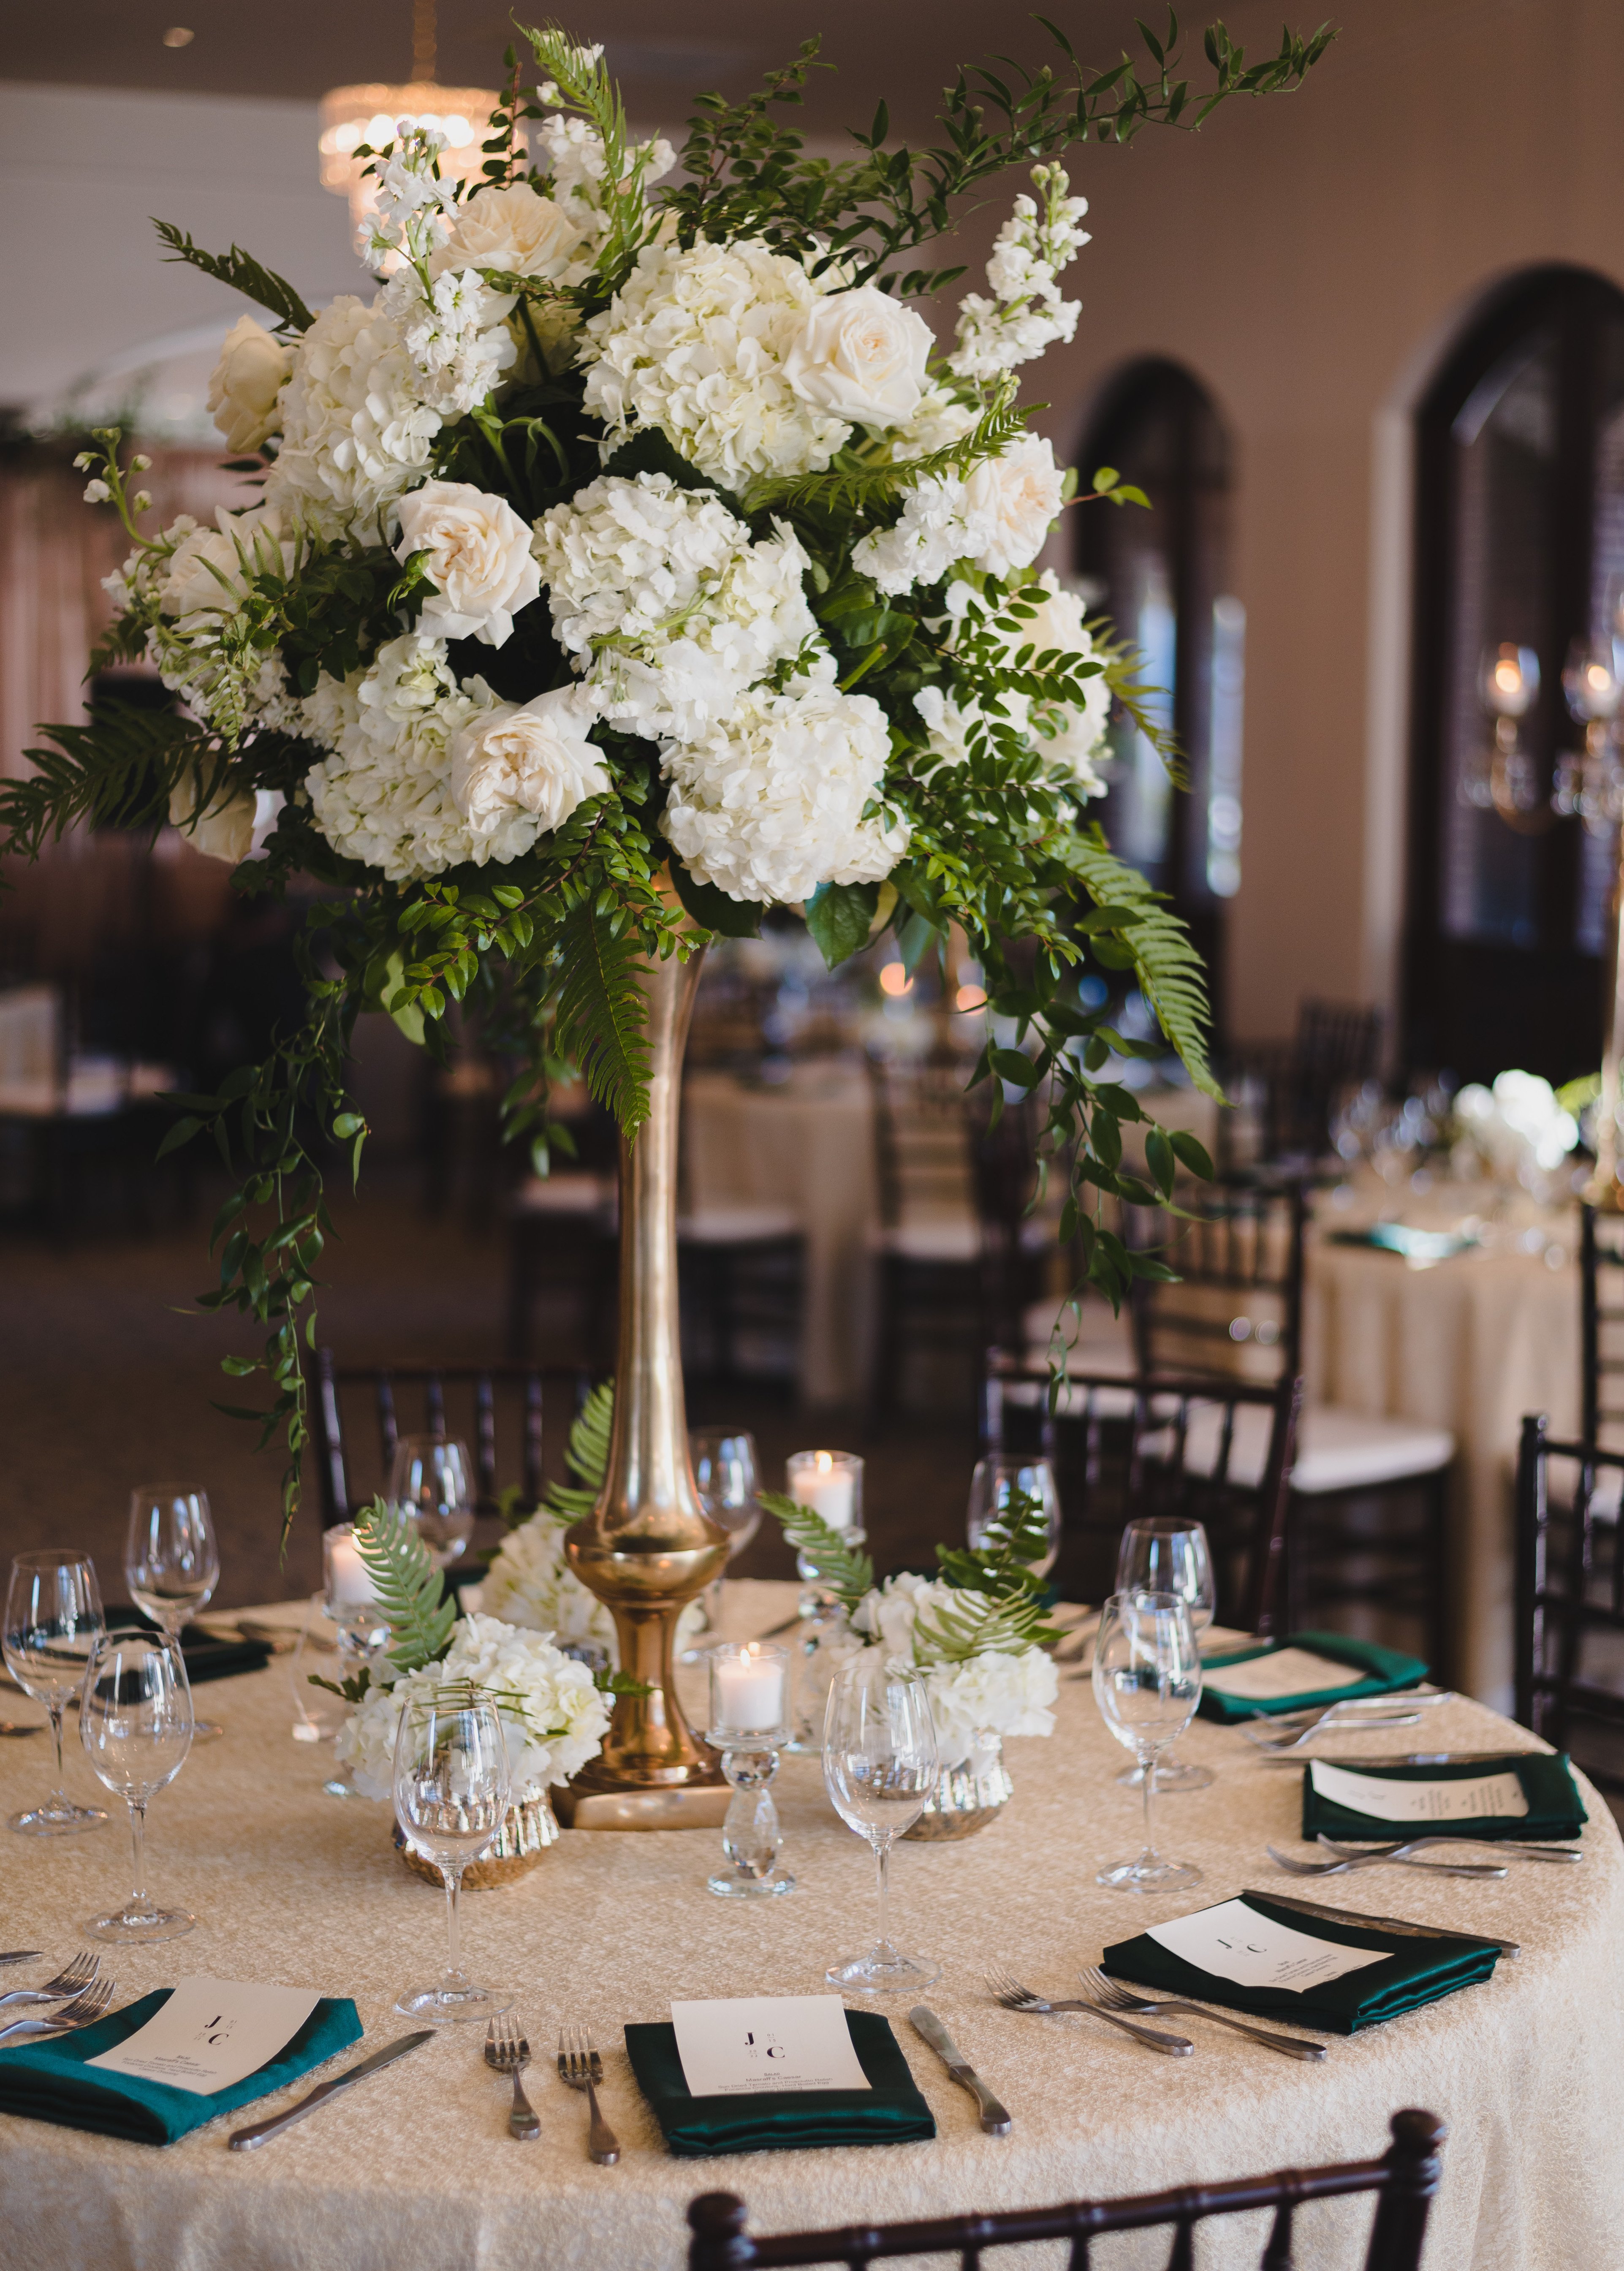 An elegant centerpiece for an eclectic 1920's-inspired wedding for Jordan Kimball and Christina Creedon in Houston, TX.